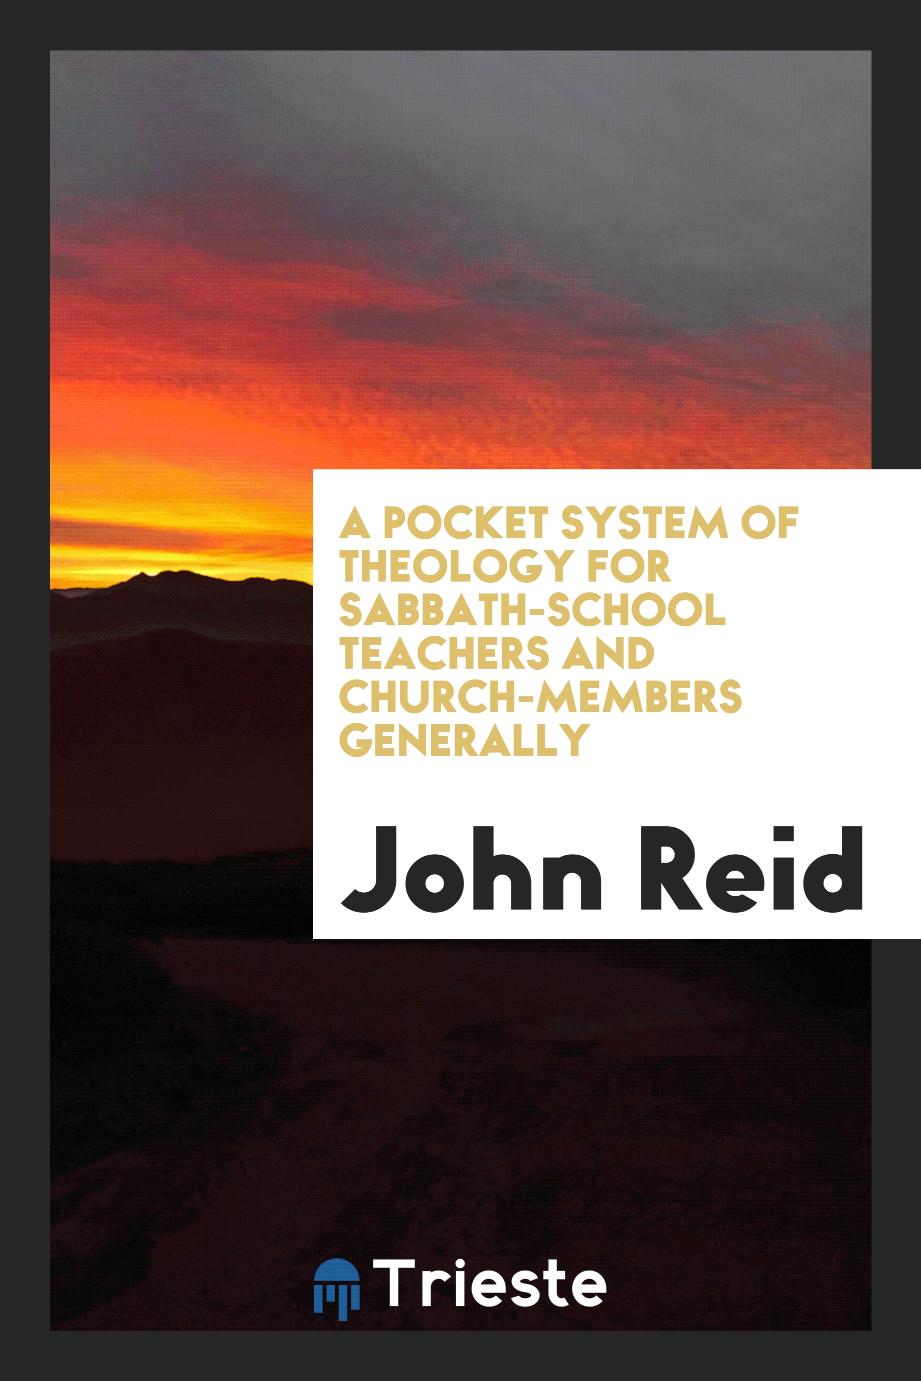 A Pocket System of Theology for Sabbath-School Teachers and Church-Members Generally